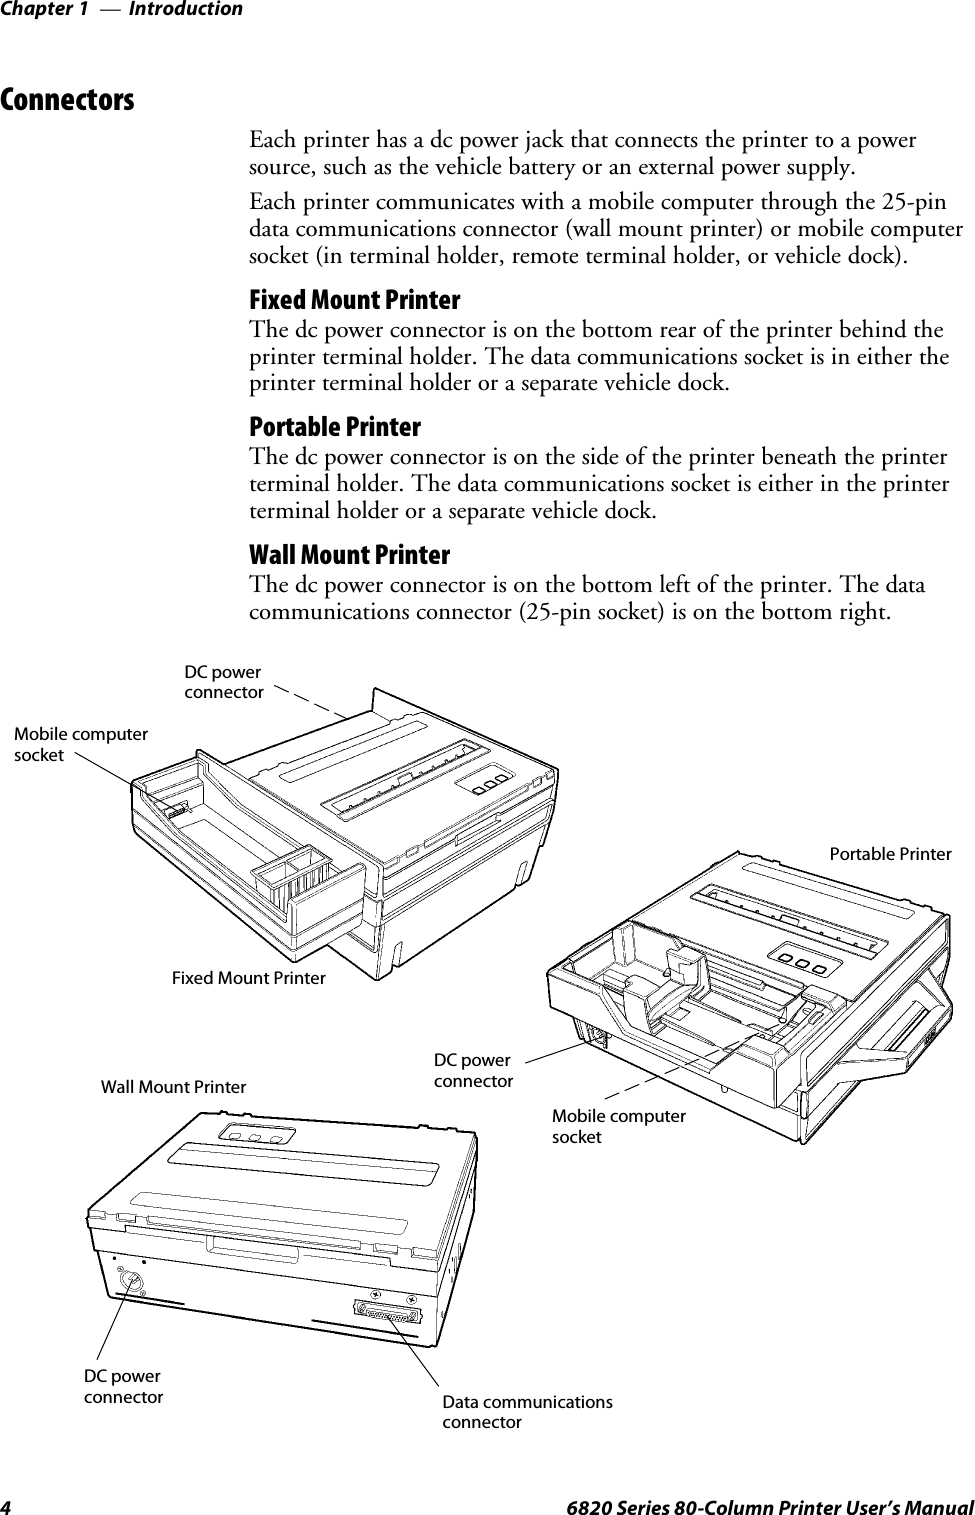 IntroductionChapter —14 6820 Series 80-Column Printer User’s ManualConnectorsEach printer has a dc power jack that connects the printer to a powersource, such as the vehicle battery or an external power supply.Each printer communicates with a mobile computer through the 25-pindata communications connector (wall mount printer) or mobile computersocket (in terminal holder, remote terminal holder, or vehicle dock).Fixed Mount PrinterThe dc power connector is on the bottom rear of the printer behind theprinter terminal holder. The data communications socket is in either theprinterterminalholderoraseparatevehicledock.Portable PrinterThe dc power connector is on the side of the printer beneath the printerterminal holder. The data communications socket is either in the printerterminal holder or a separate vehicle dock.Wall Mount PrinterThe dc power connector is on the bottom left of the printer. The datacommunications connector (25-pin socket) is on the bottom right.Data communicationsconnectorDC powerconnectorWall Mount PrinterDC powerconnectorDC powerconnectorPortable PrinterMobile computersocketMobile computersocketFixed Mount Printer